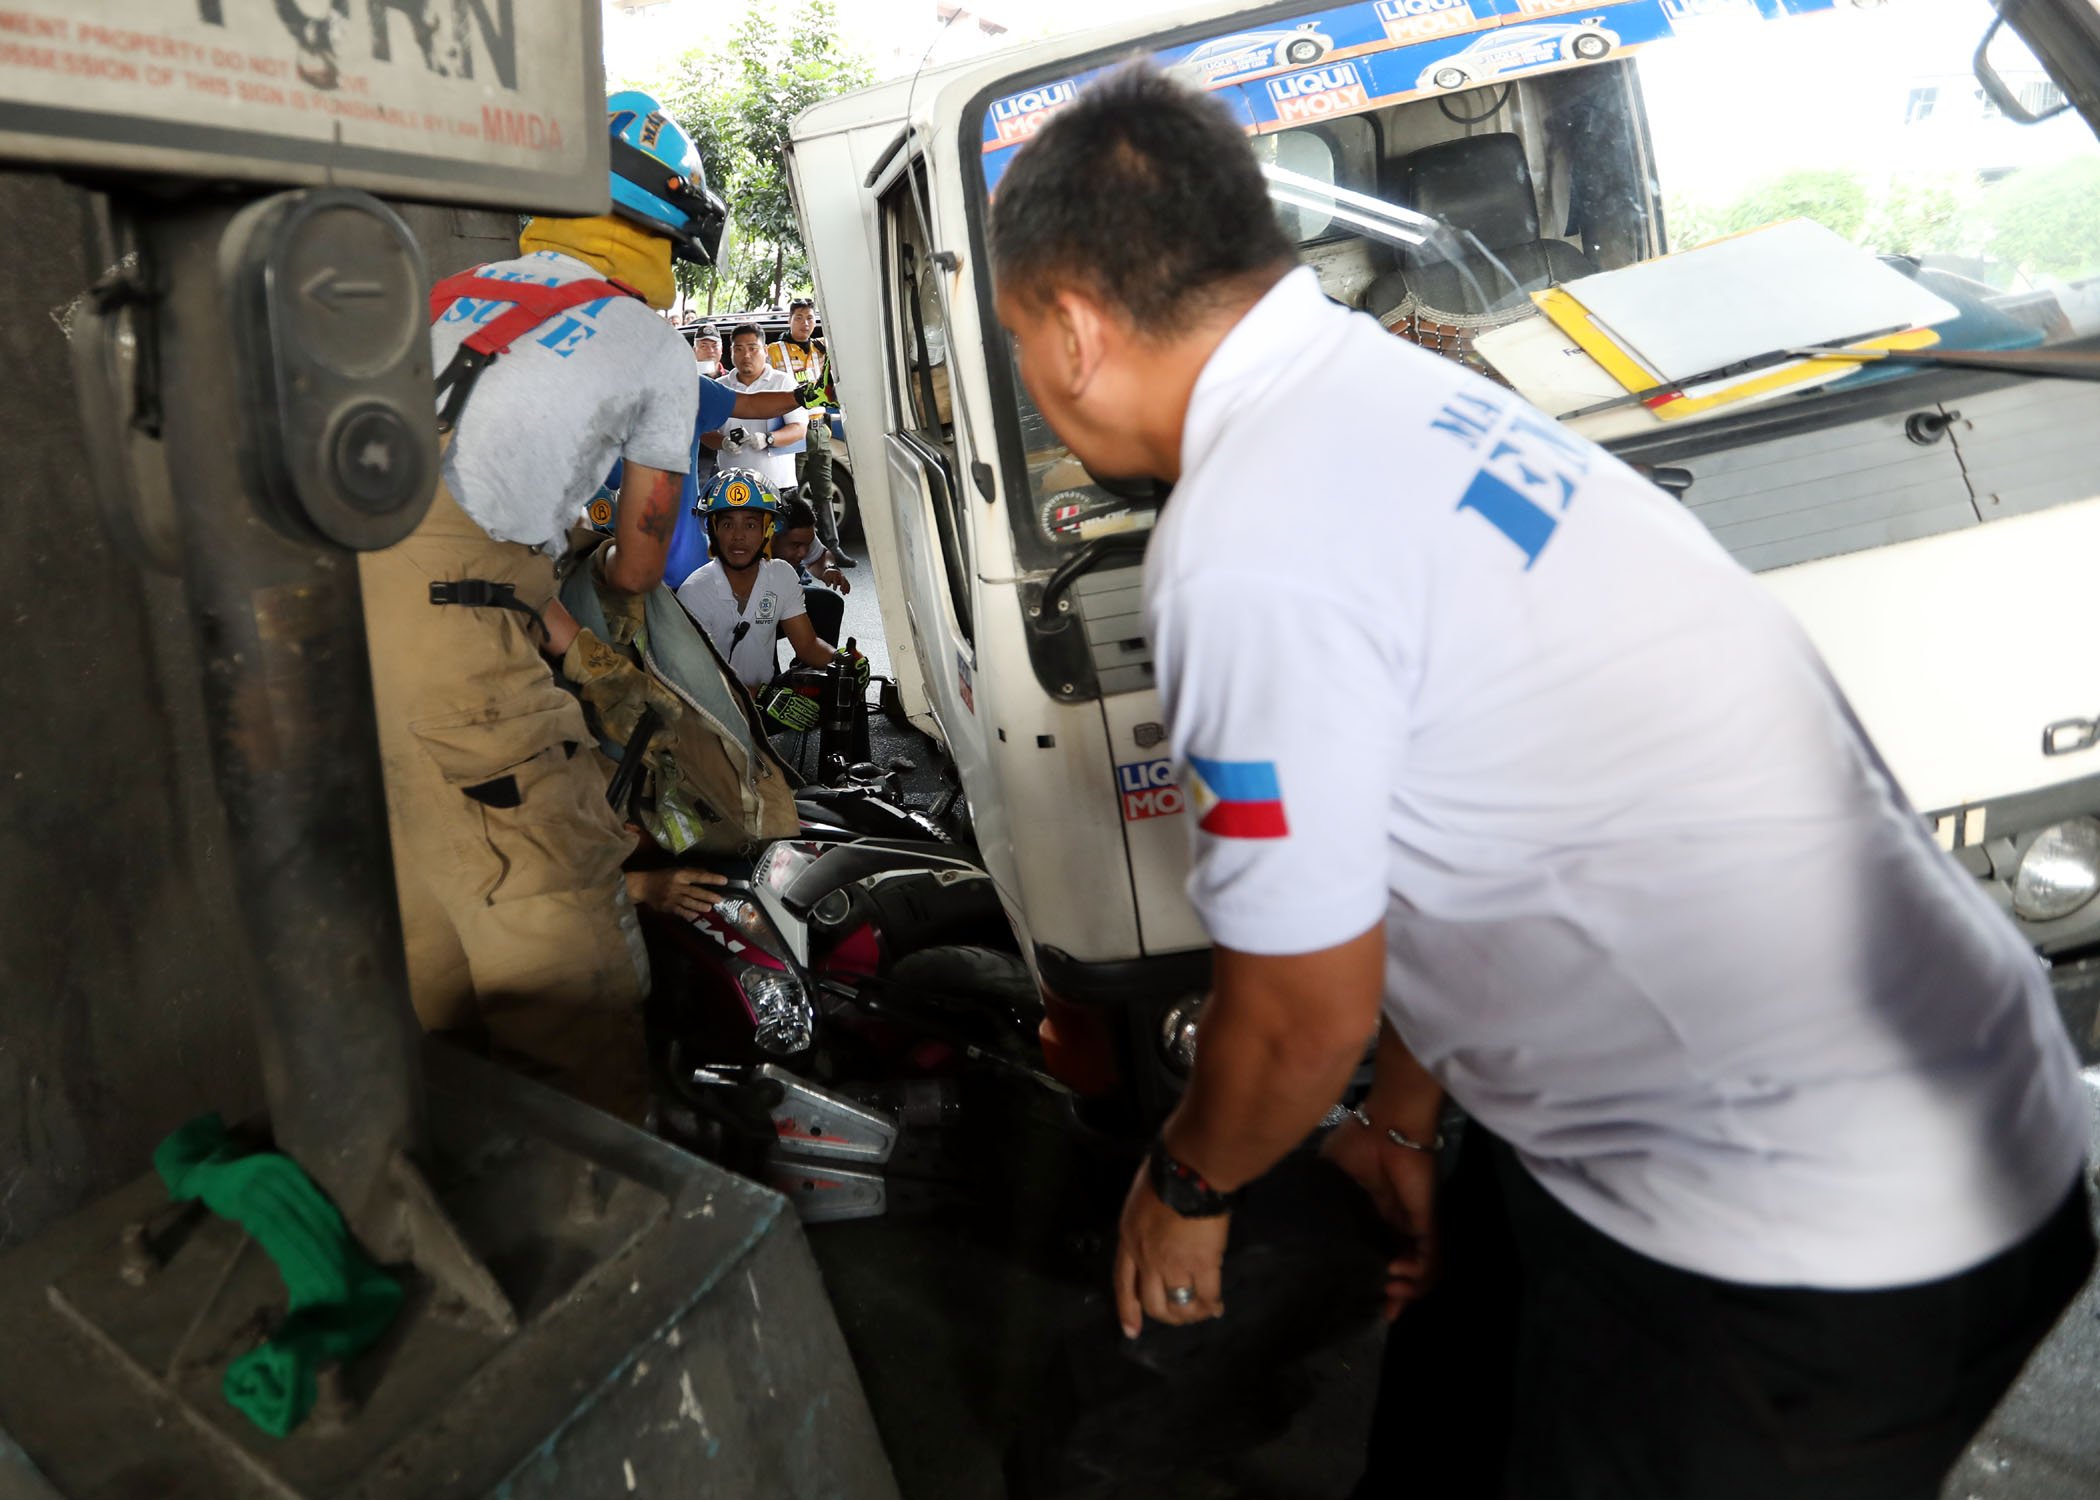 Makati rescue team responds to accident